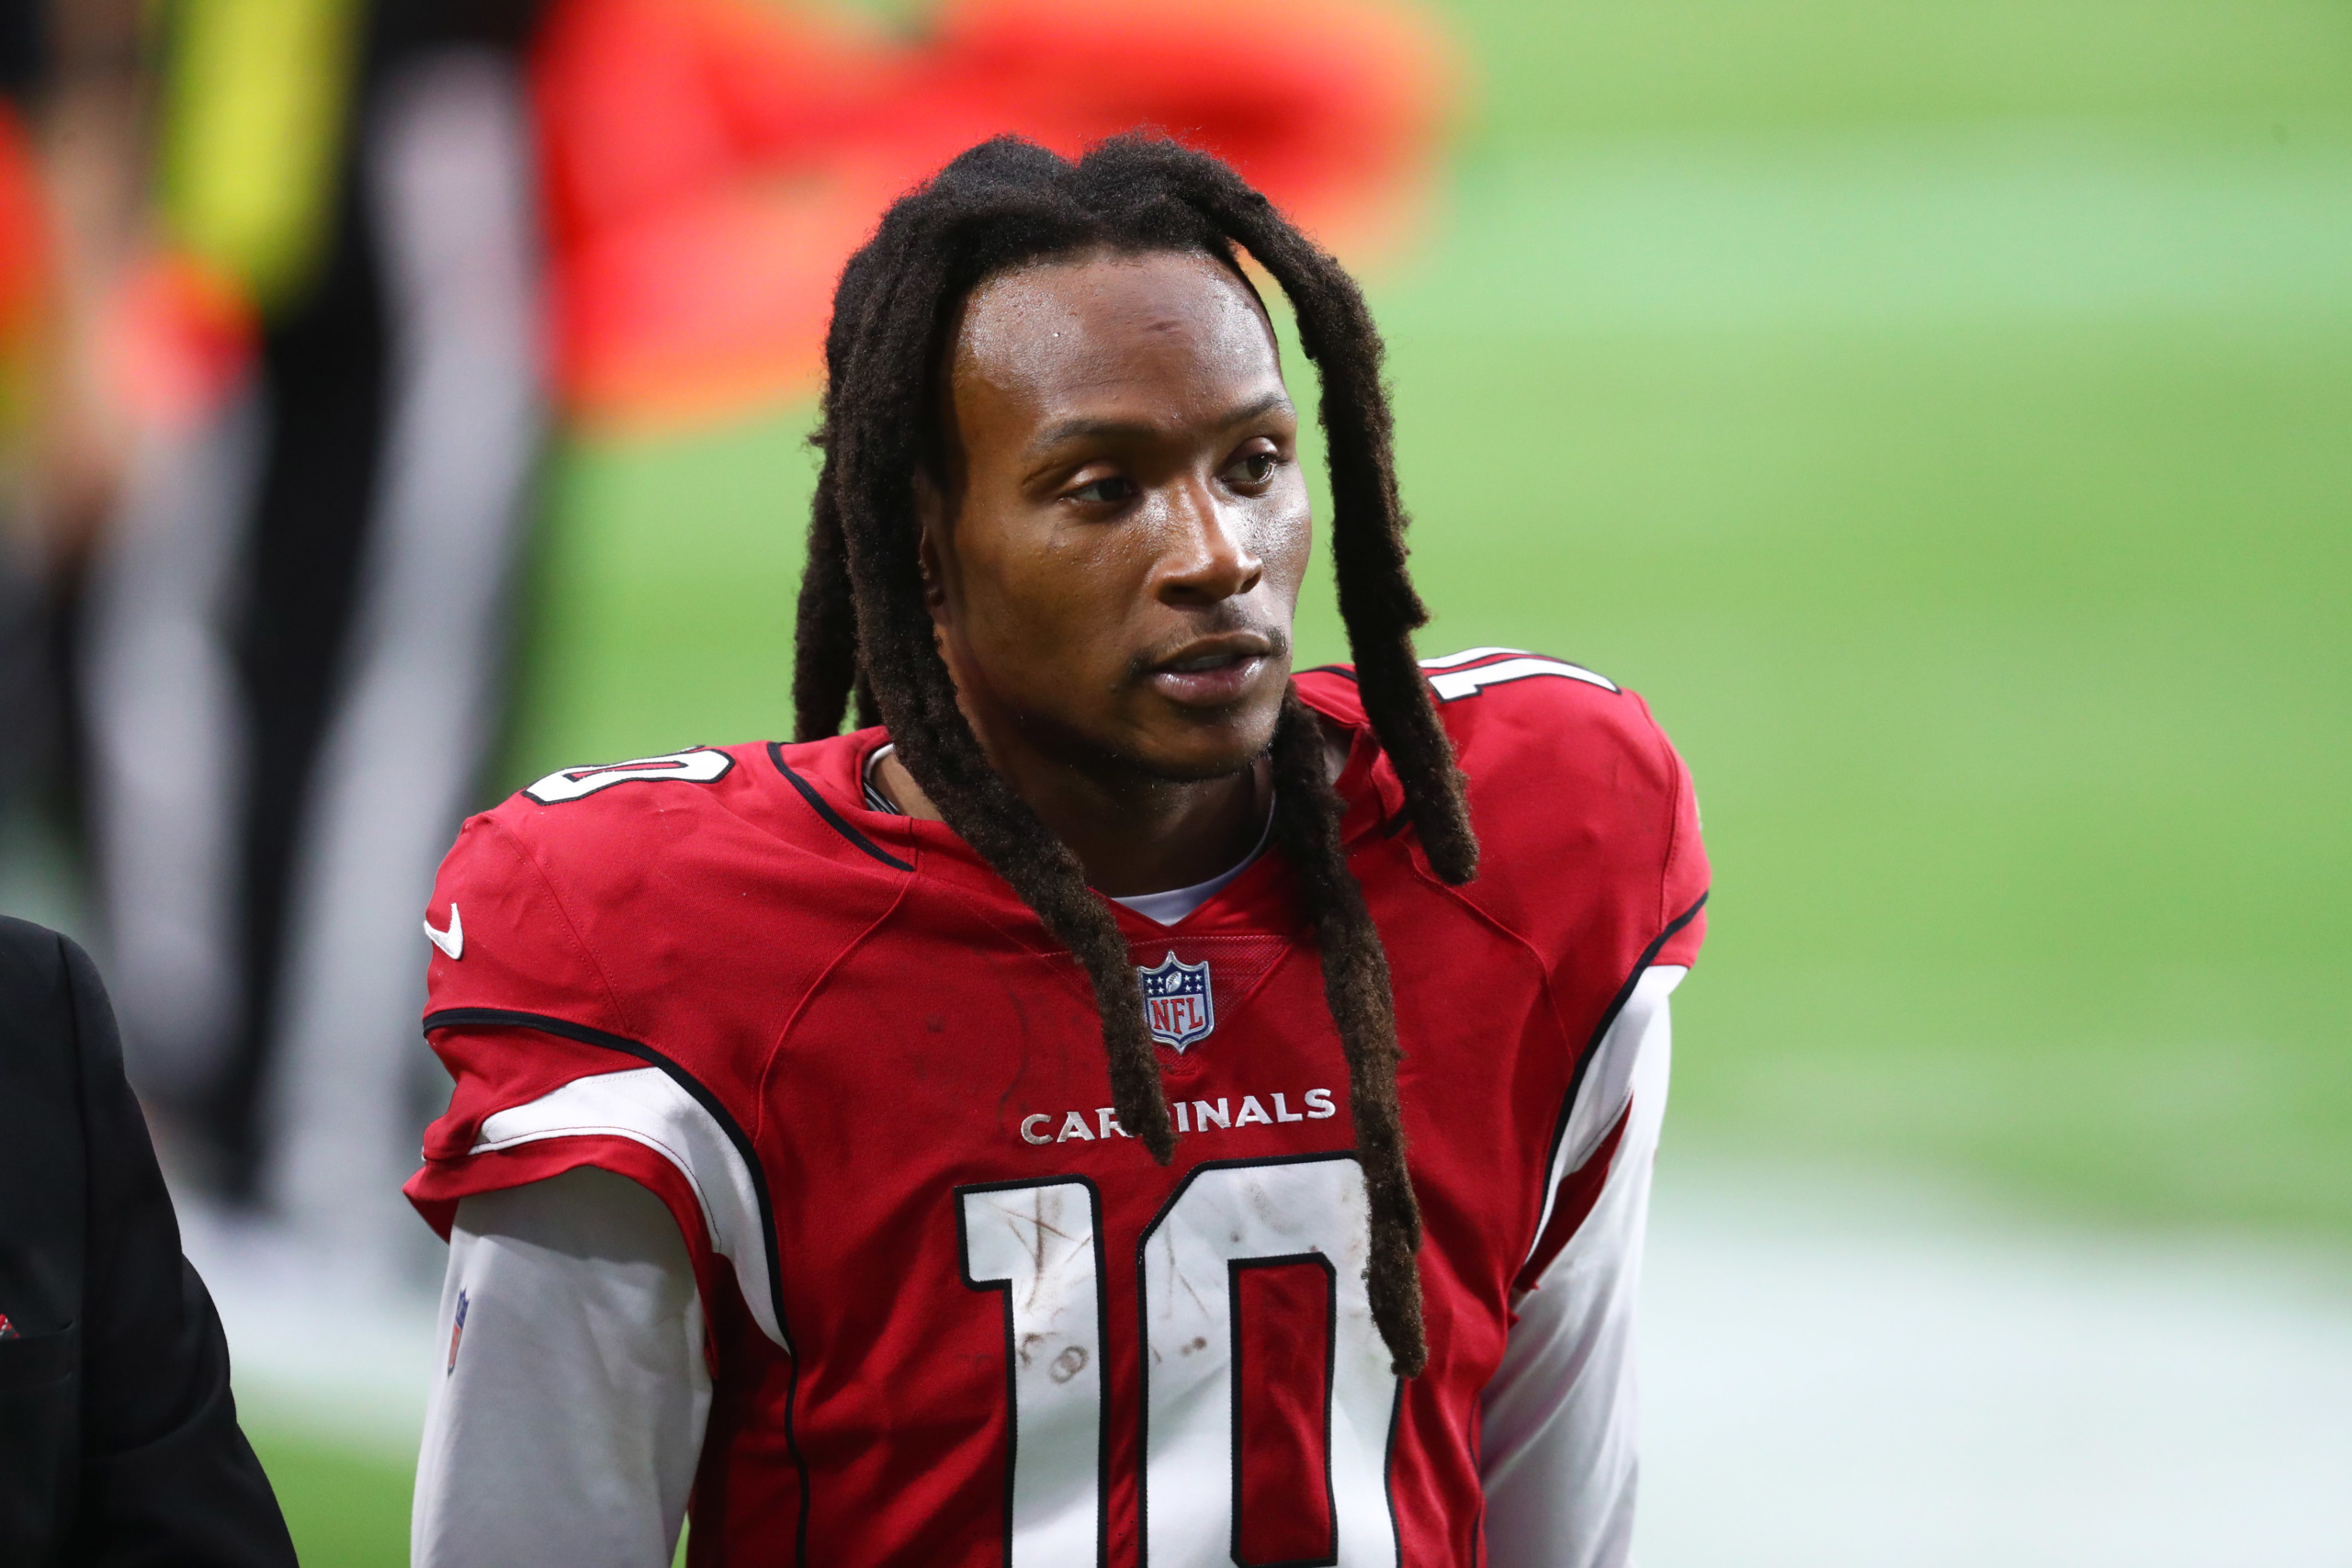 DeAndre Hopkins Continues Building Investment Portfolio with BioSteel Deal